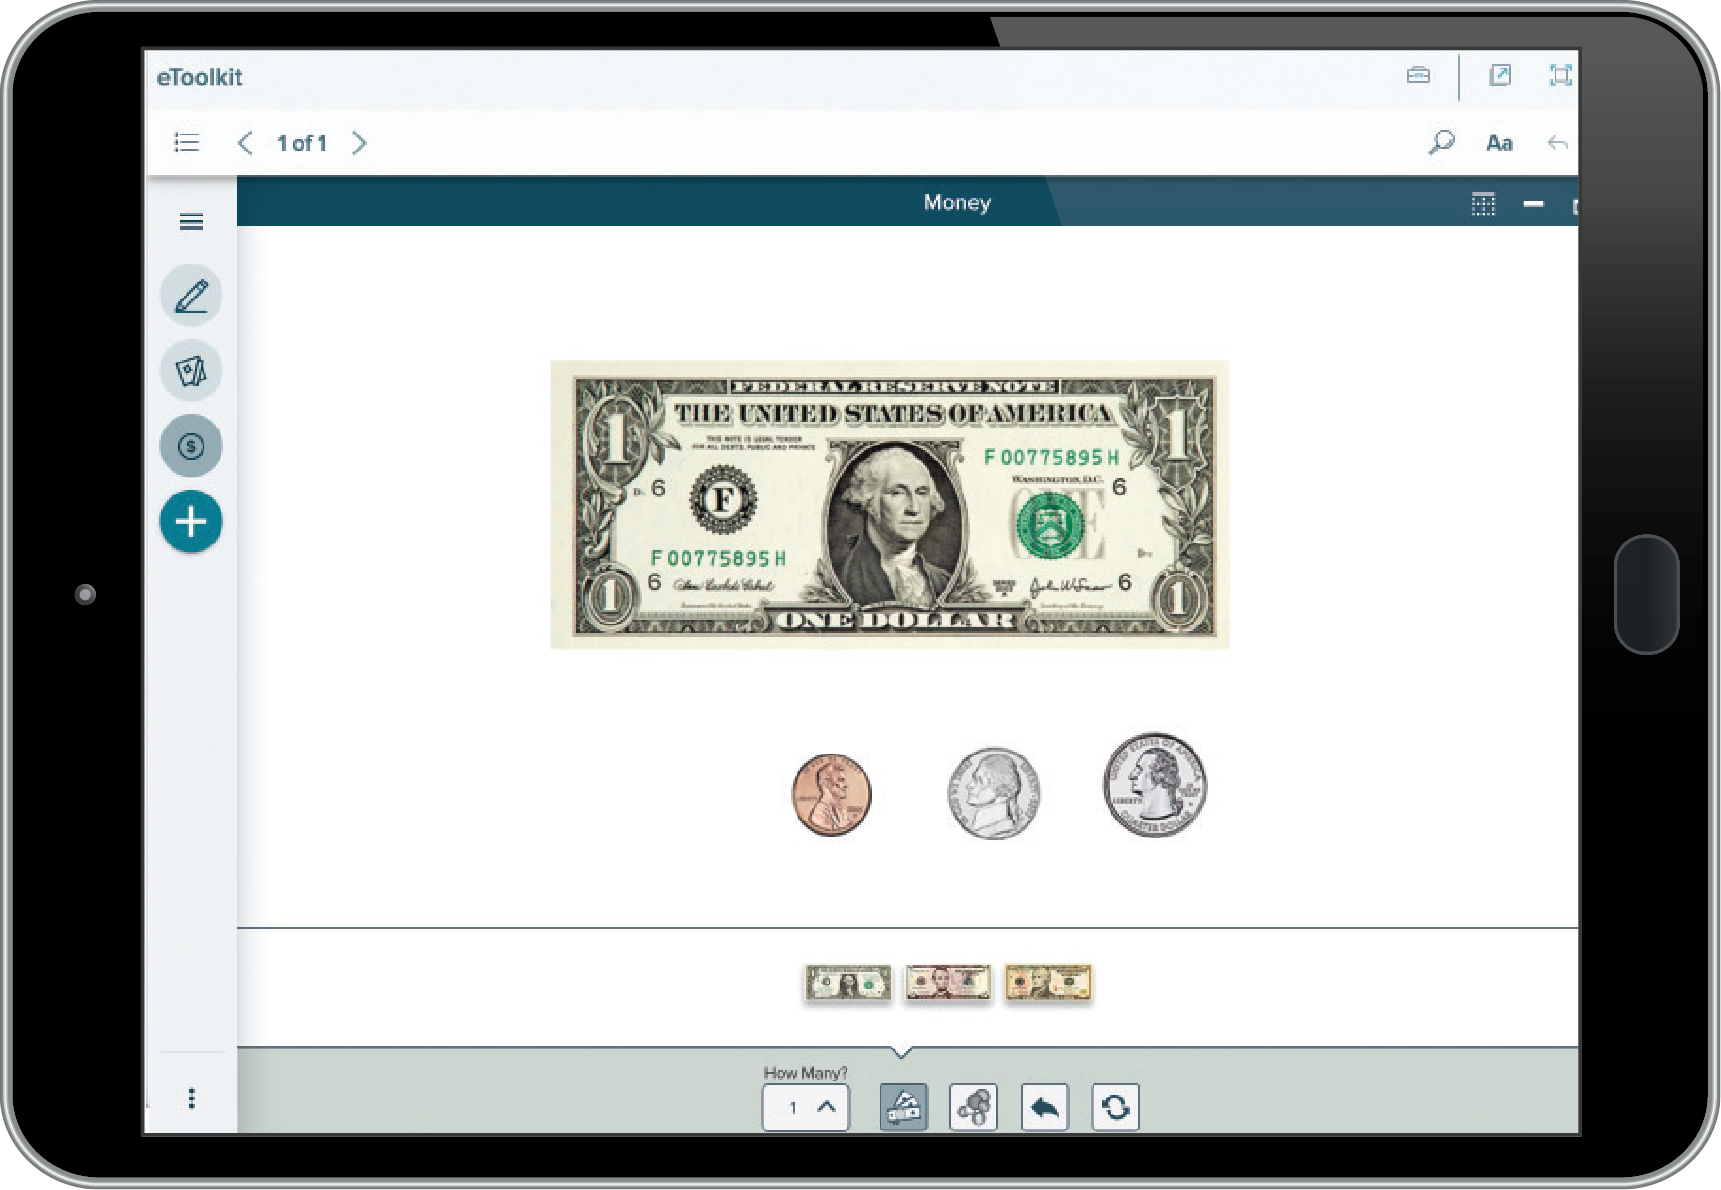 Number Worlds eTook Kit example on tablet showing examples of money